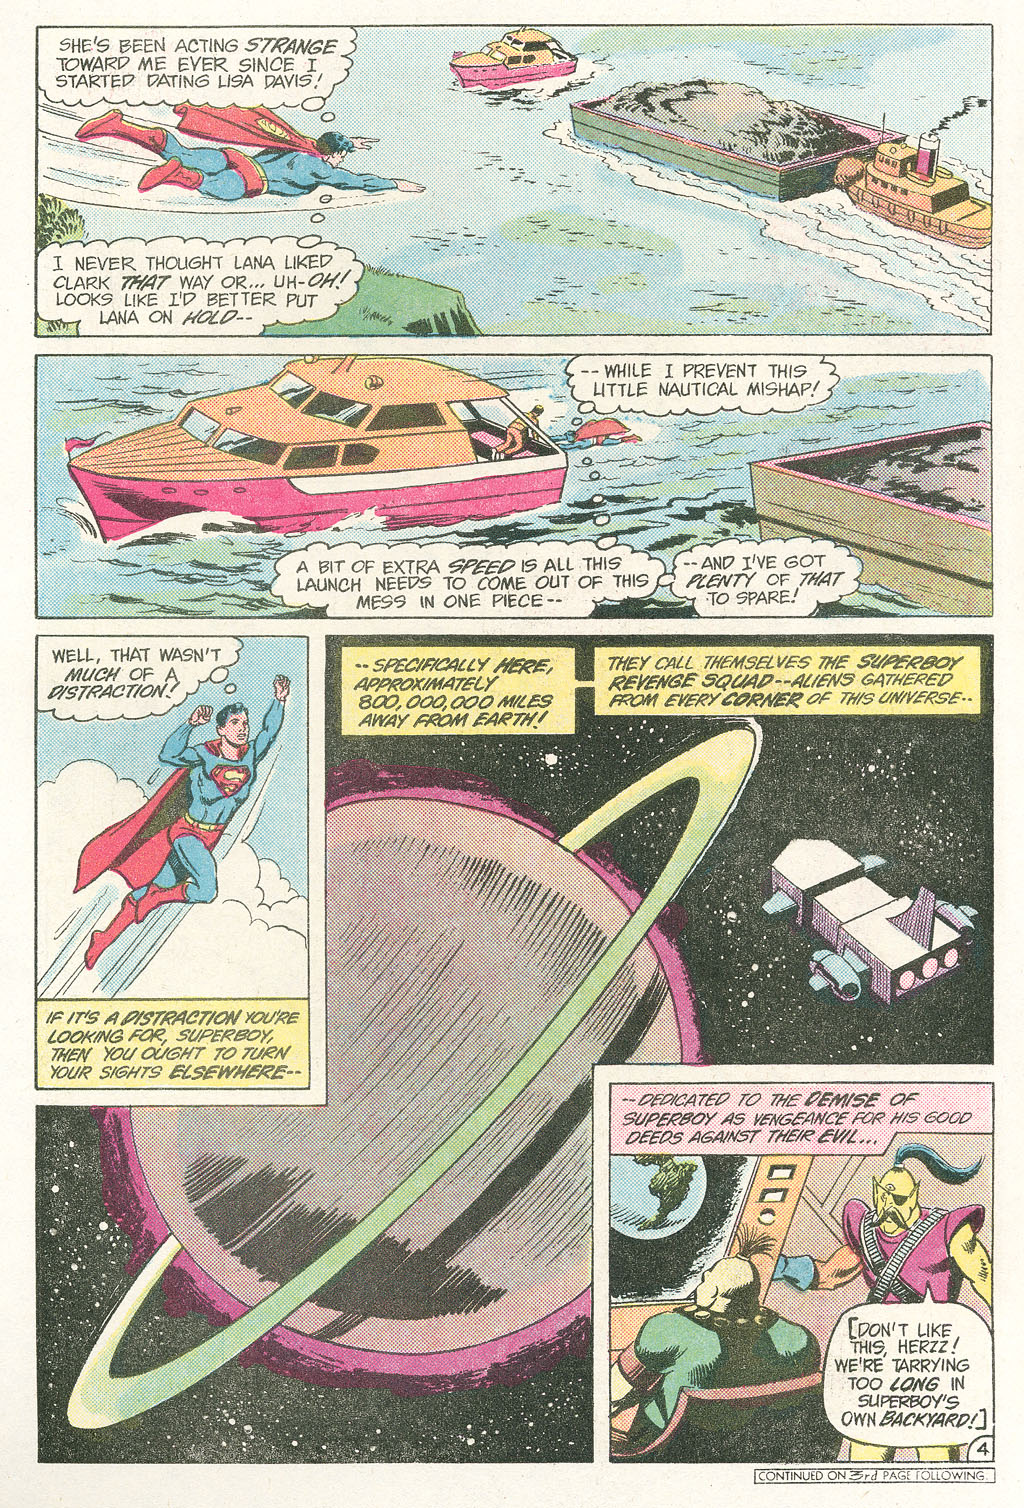 The New Adventures of Superboy 54 Page 5